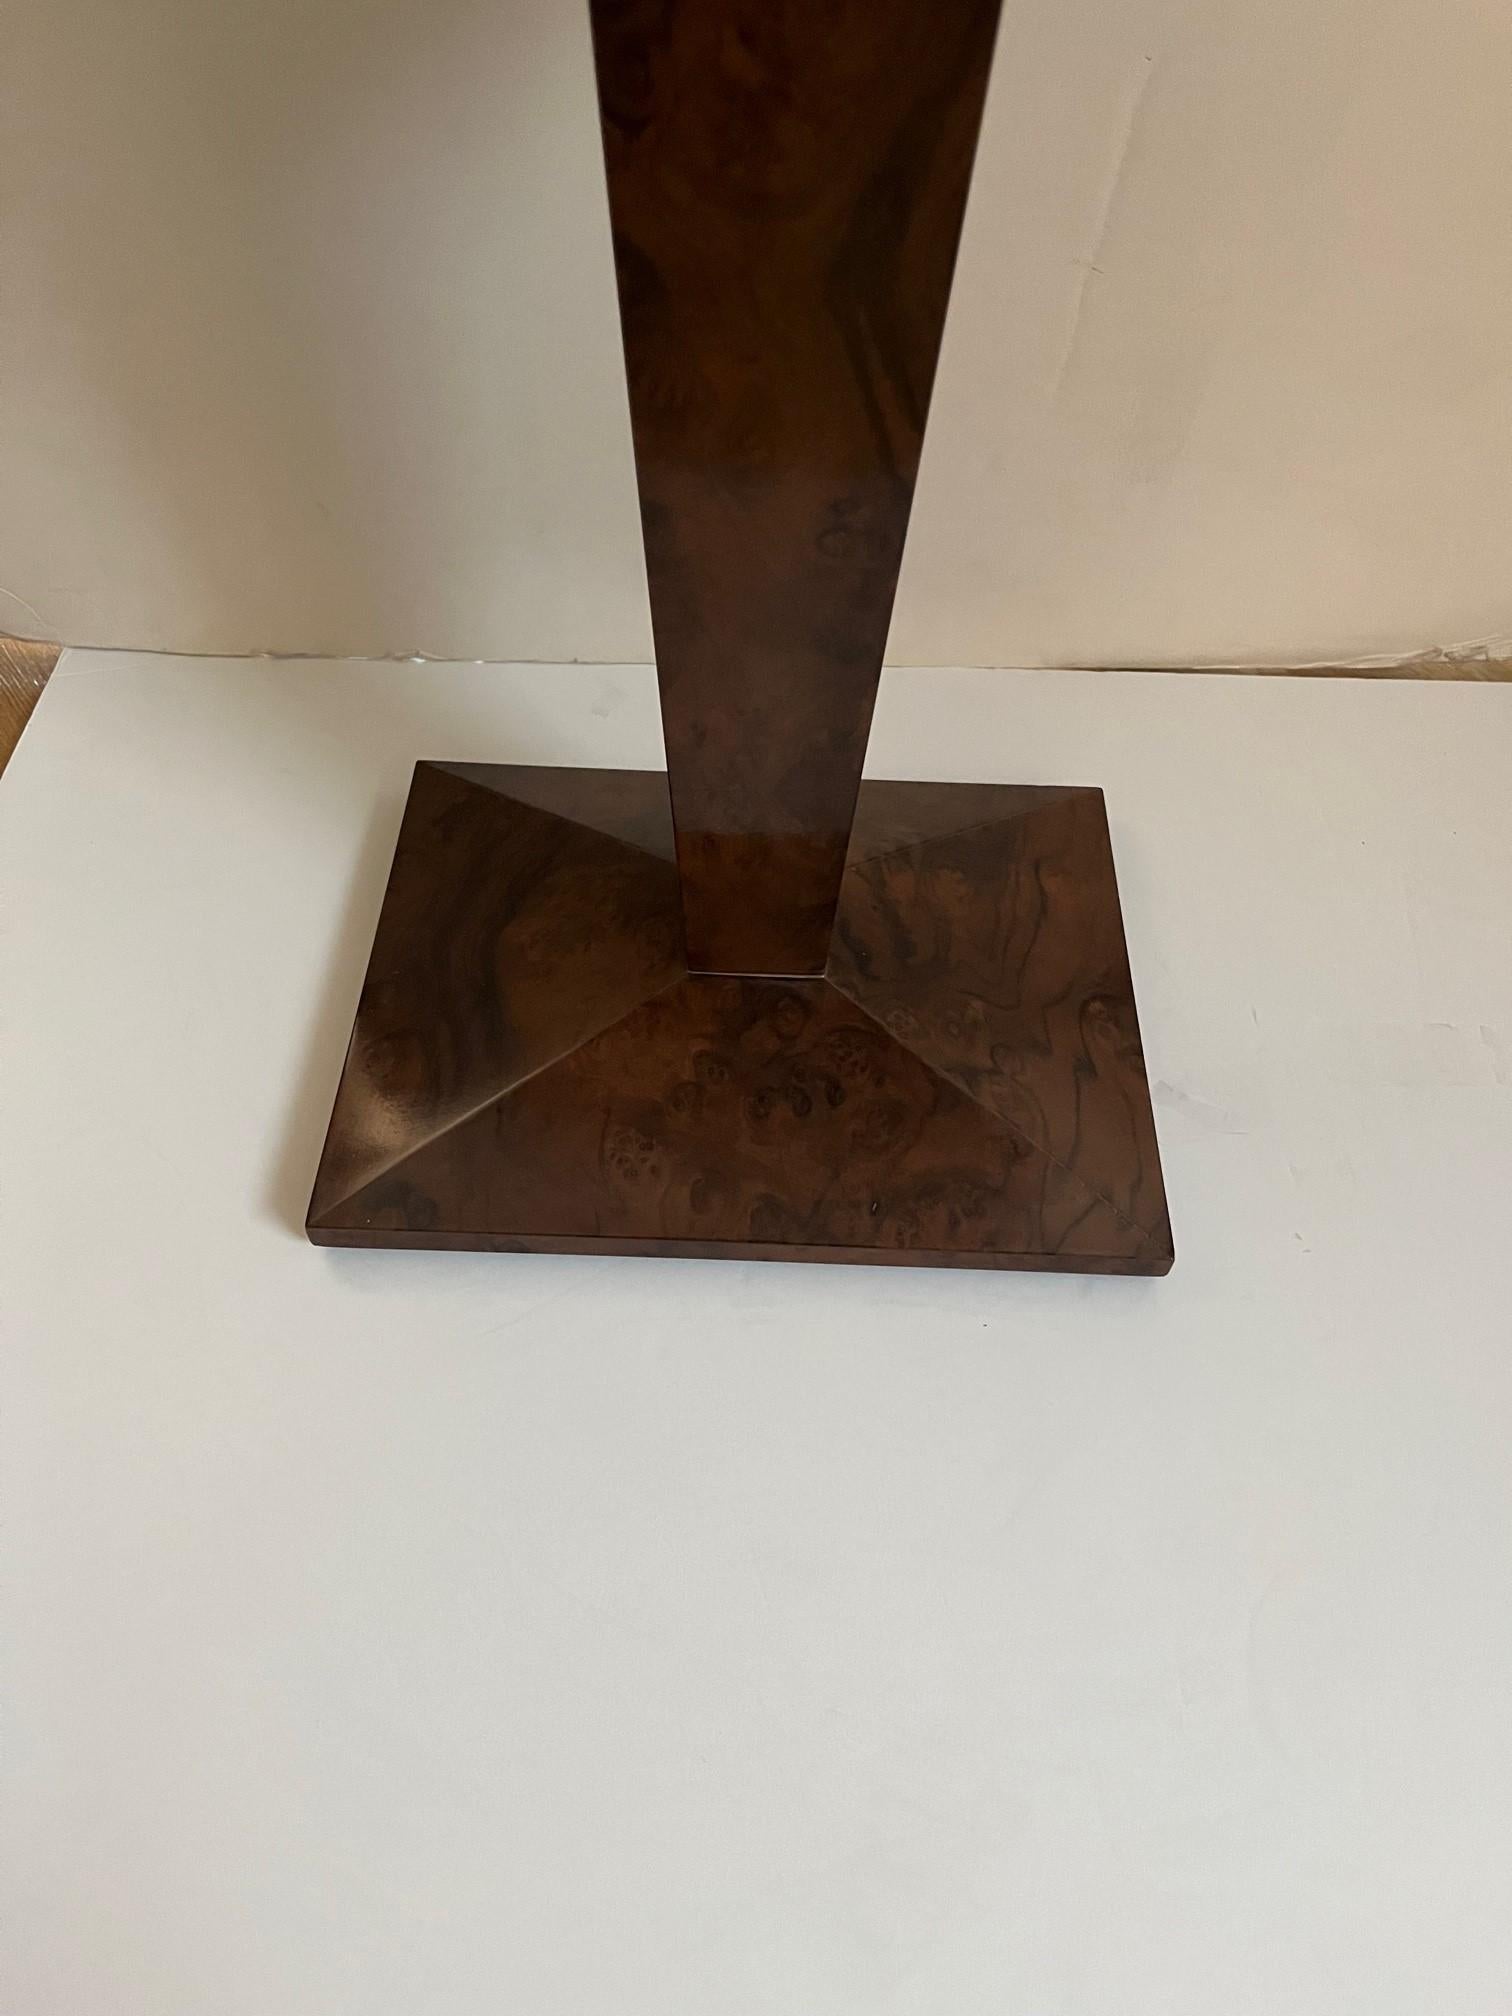 Rectangular French Burled Walnut Side Table, Available in Round Top as well
Base Dimensions: 12.5